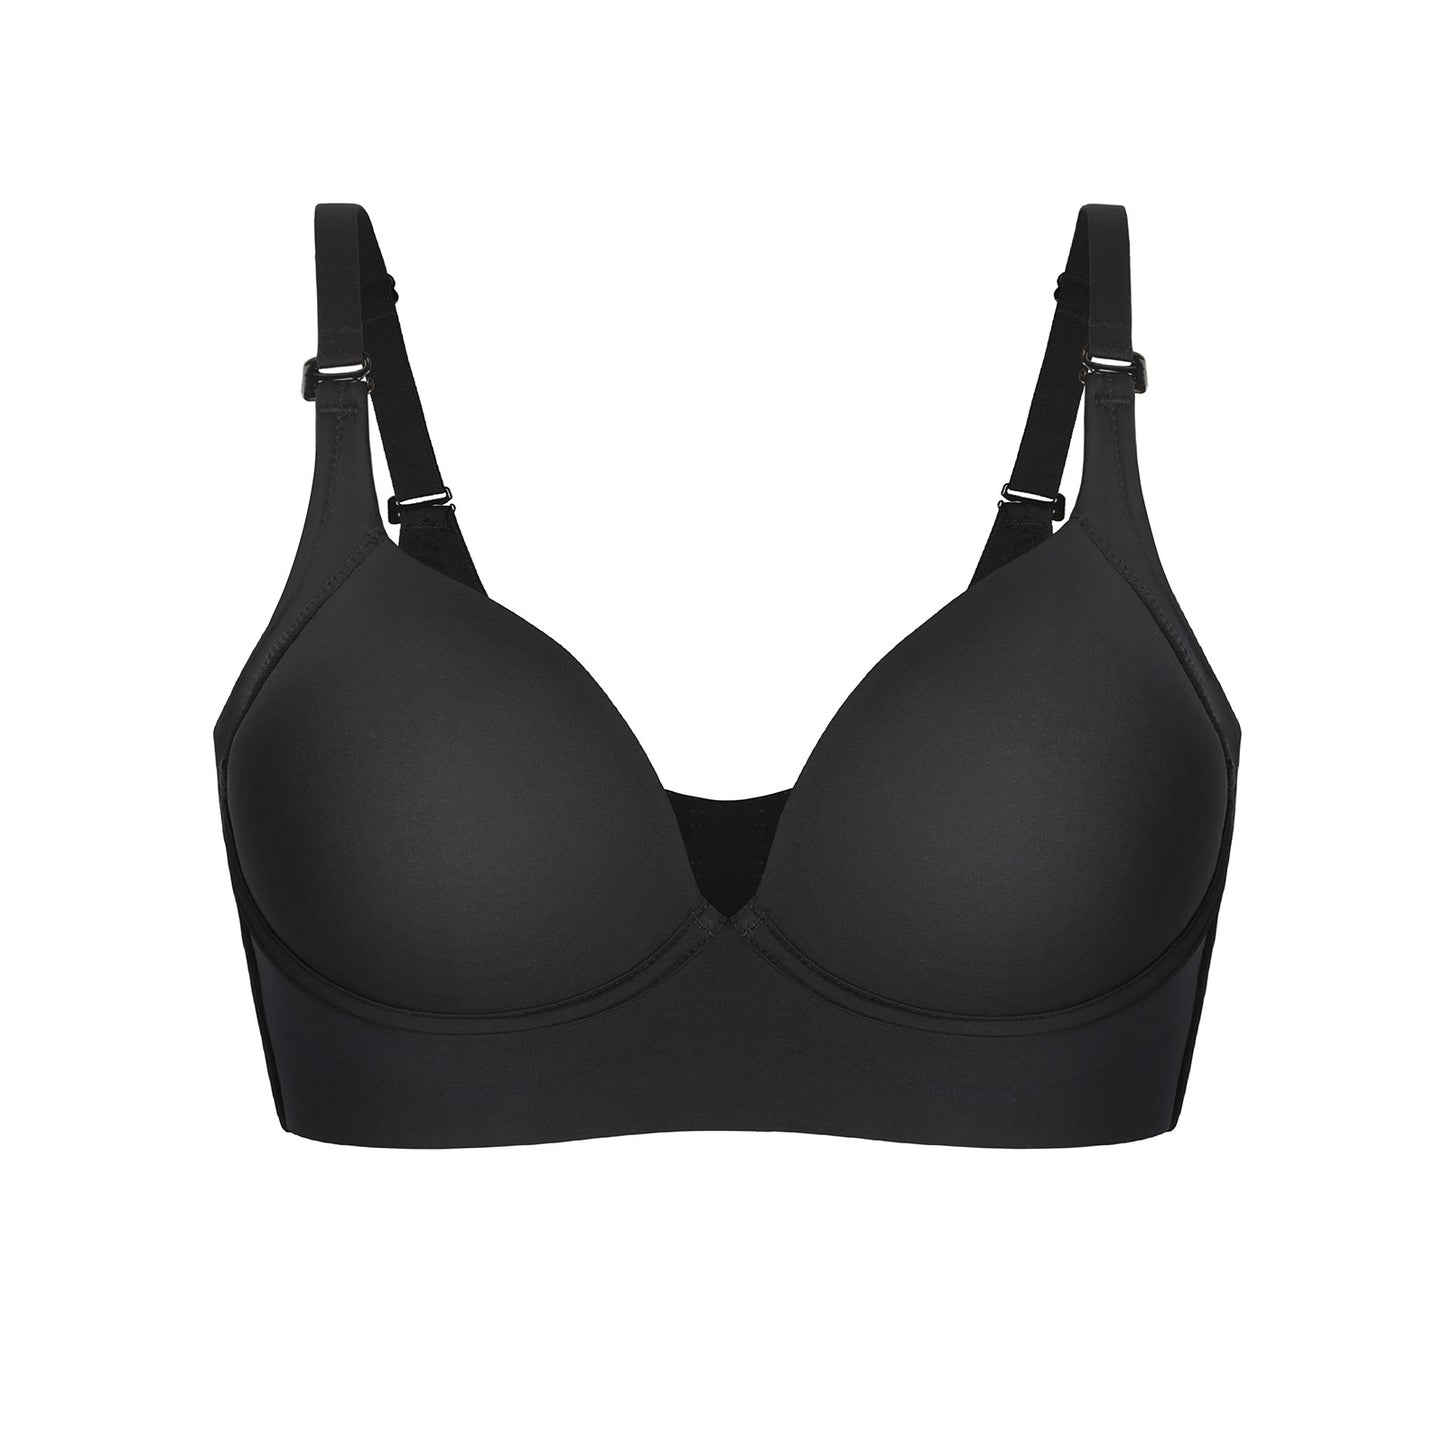 Full coverage bra with attractive appearance